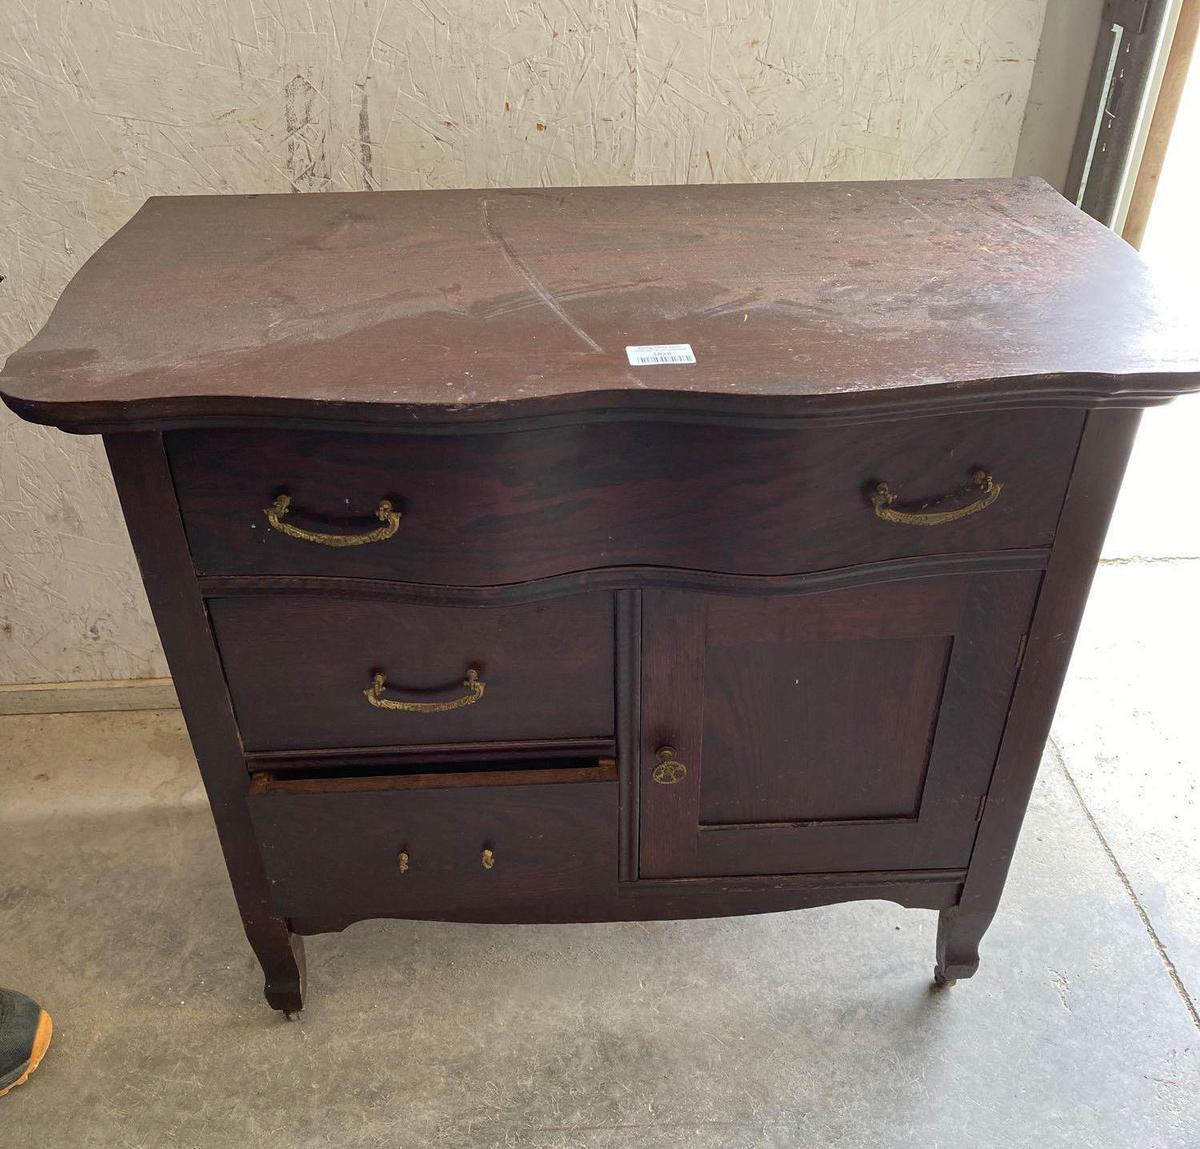 Commode (29 inch height/33 inch length)